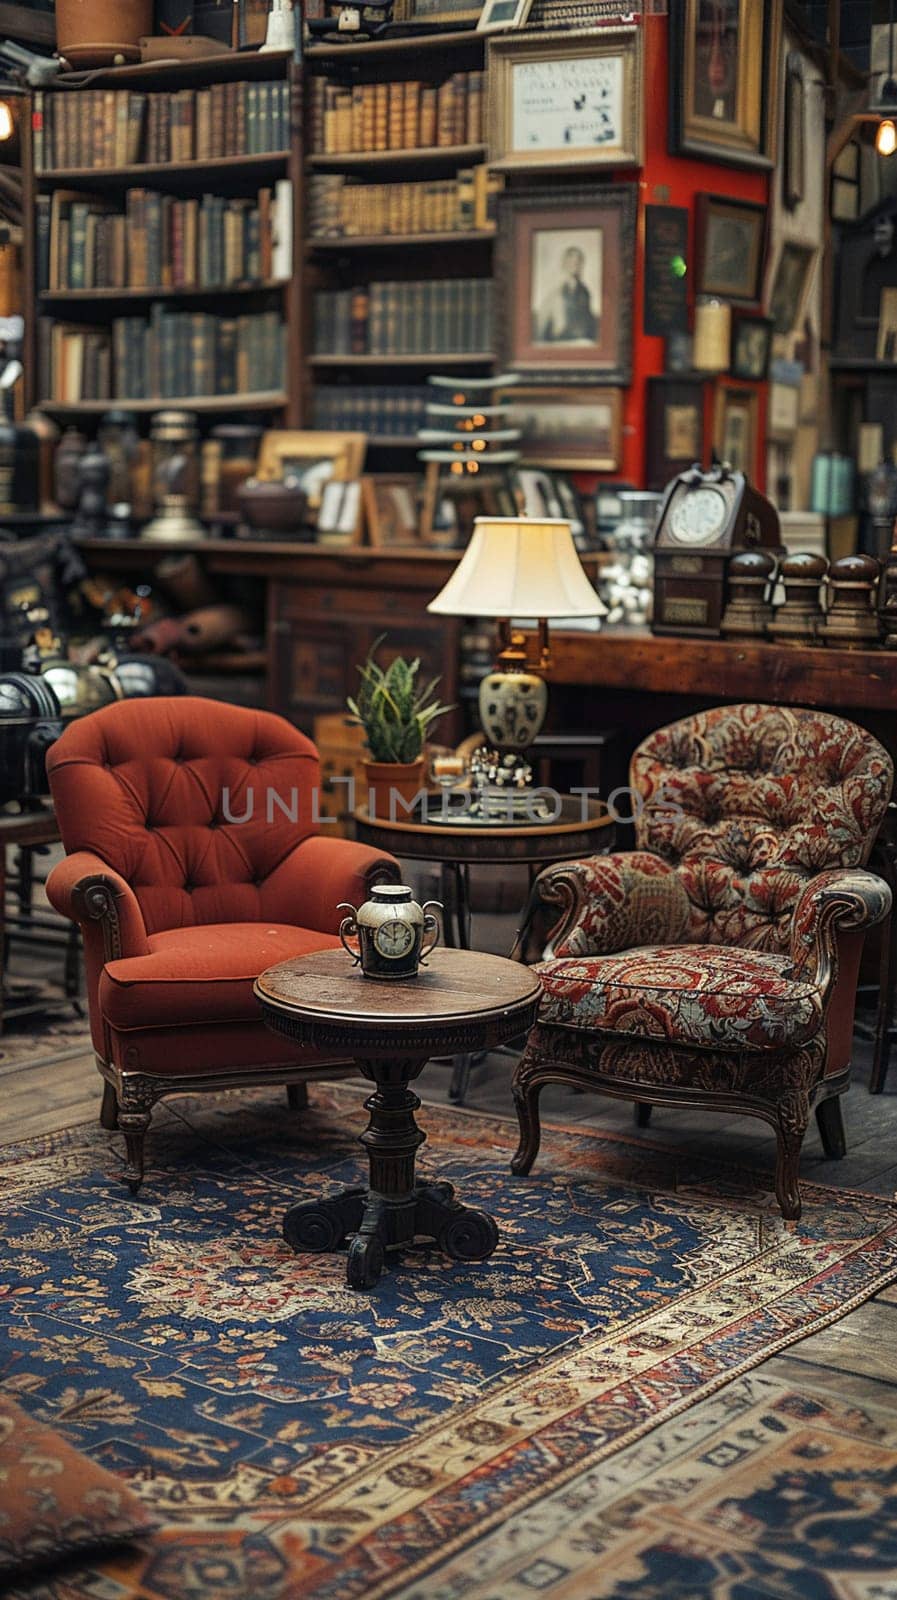 Antique Furniture Shop Curates History in Business of Vintage Decor, Chairs and tables arrange a scene of elegance and nostalgia in the business of antiques.